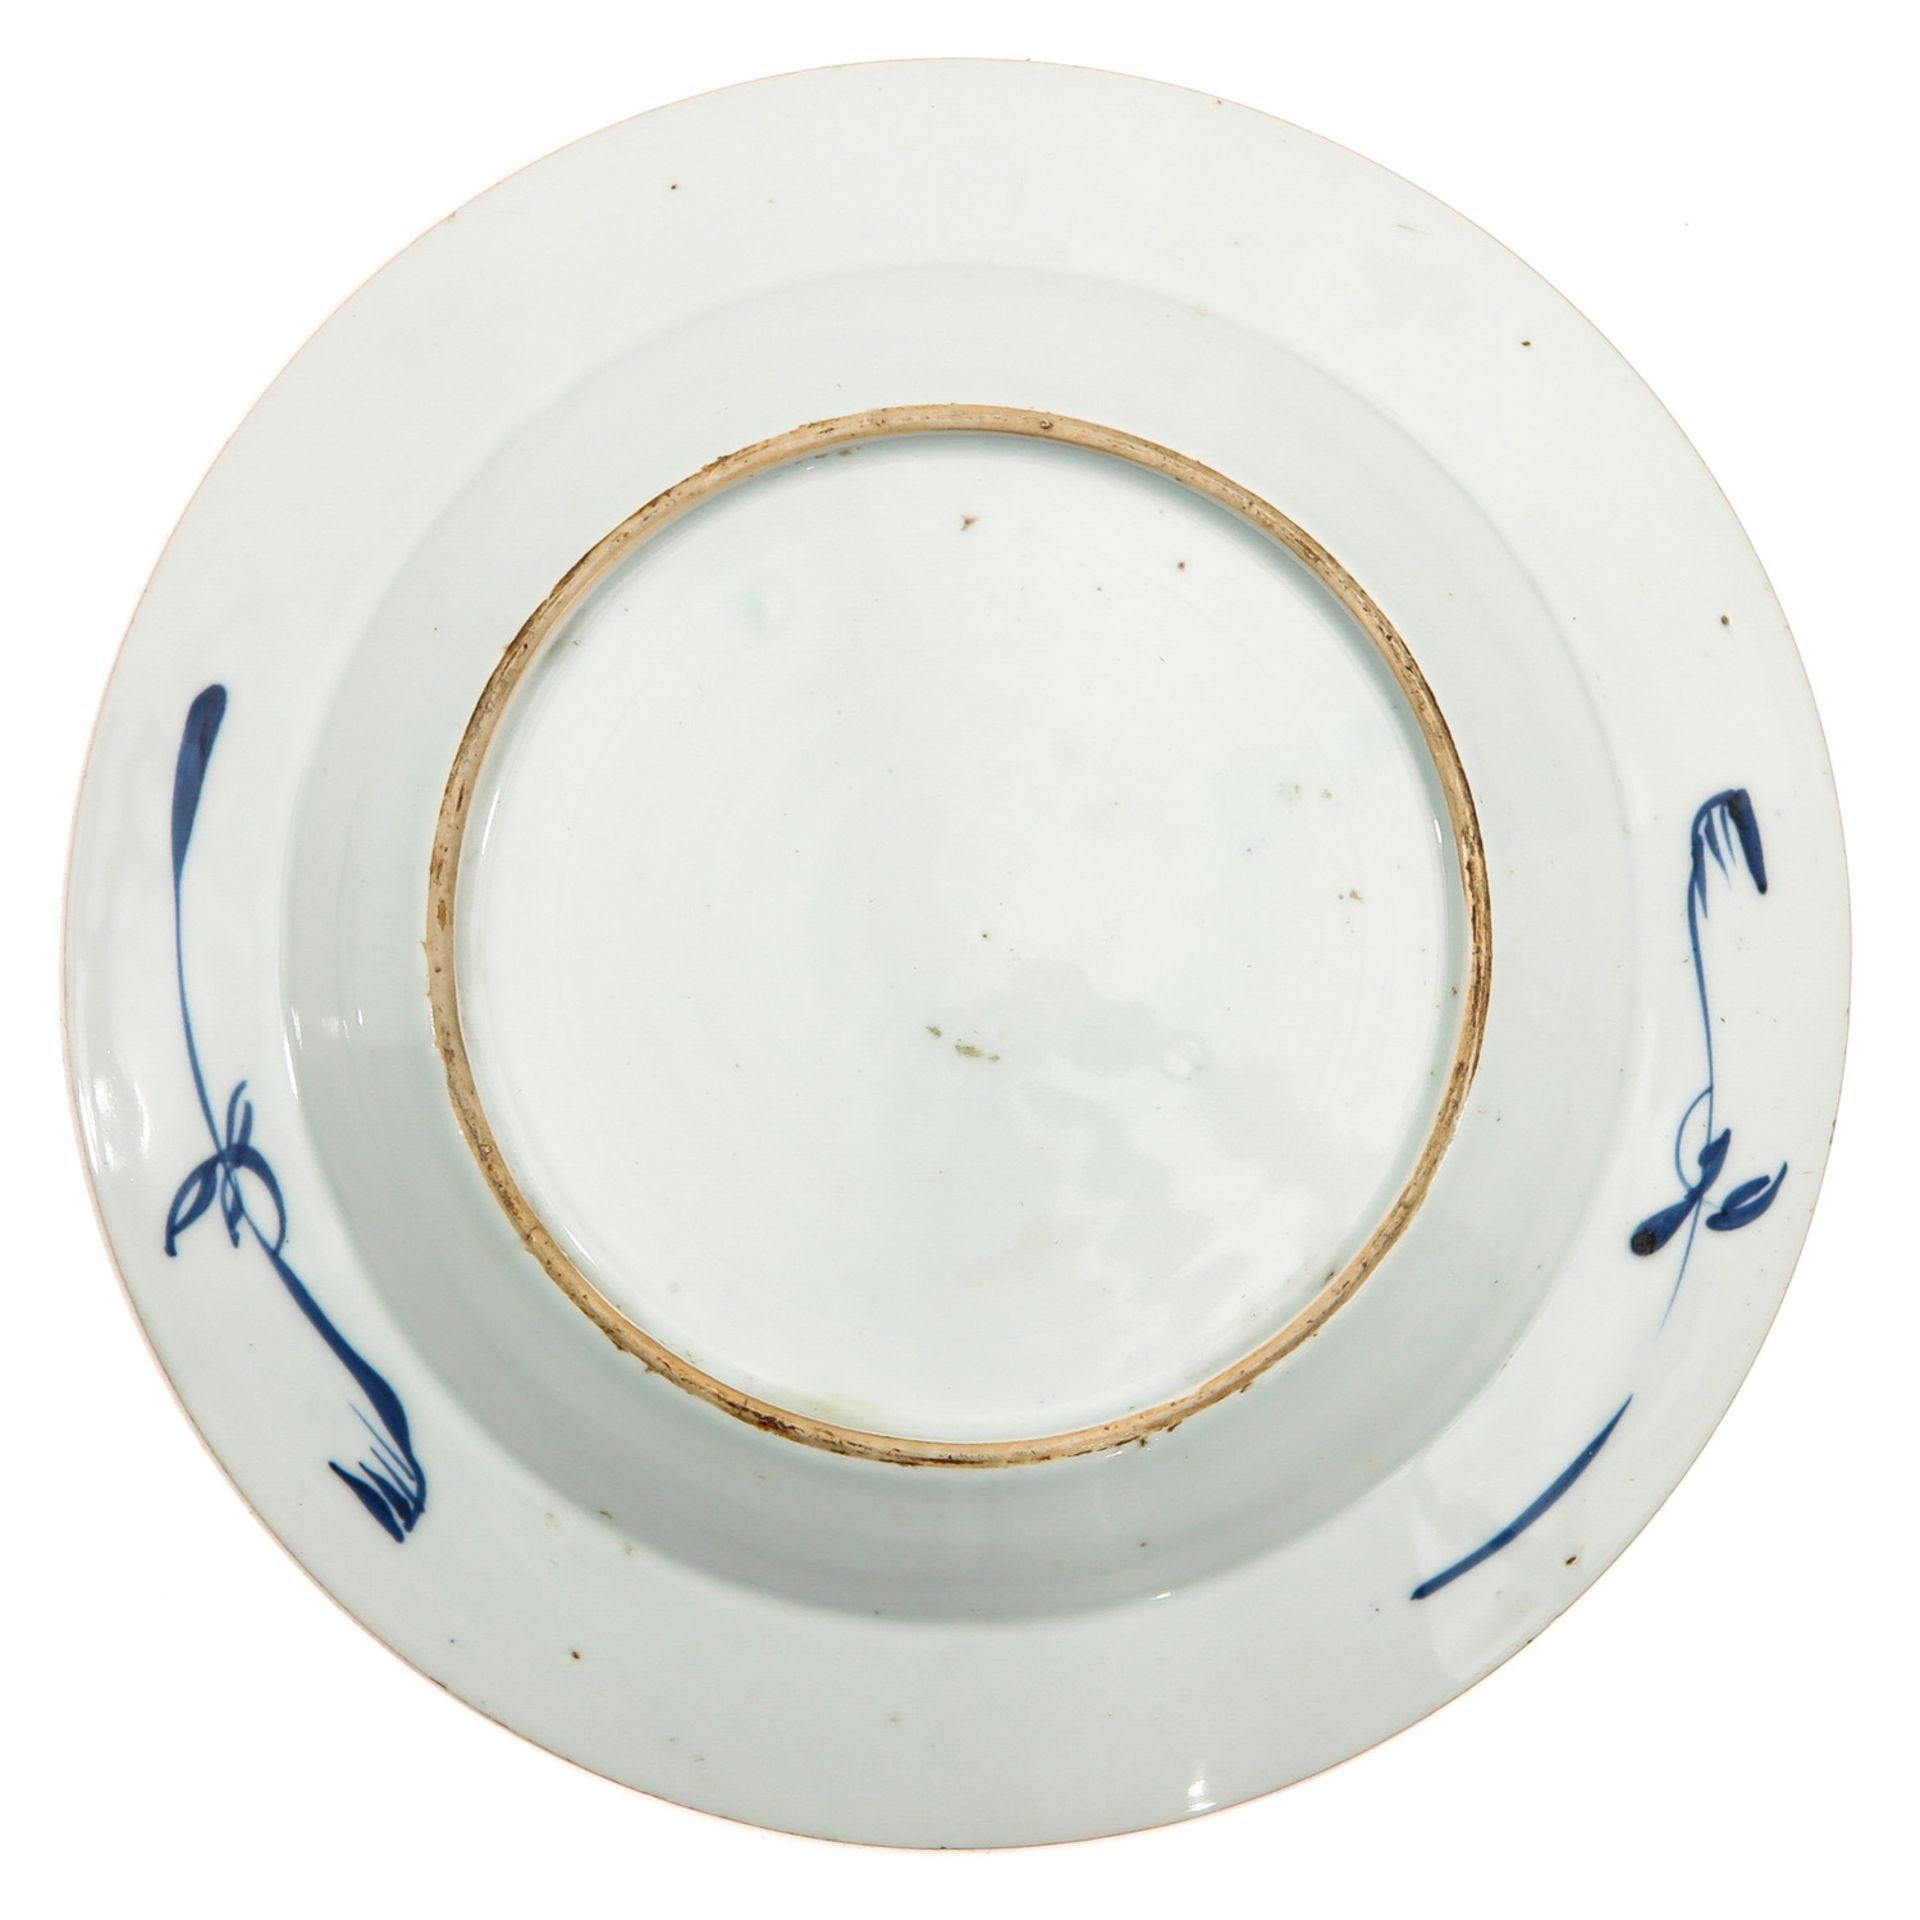 A Collection of 3 Blue and White Plates - Image 8 of 10